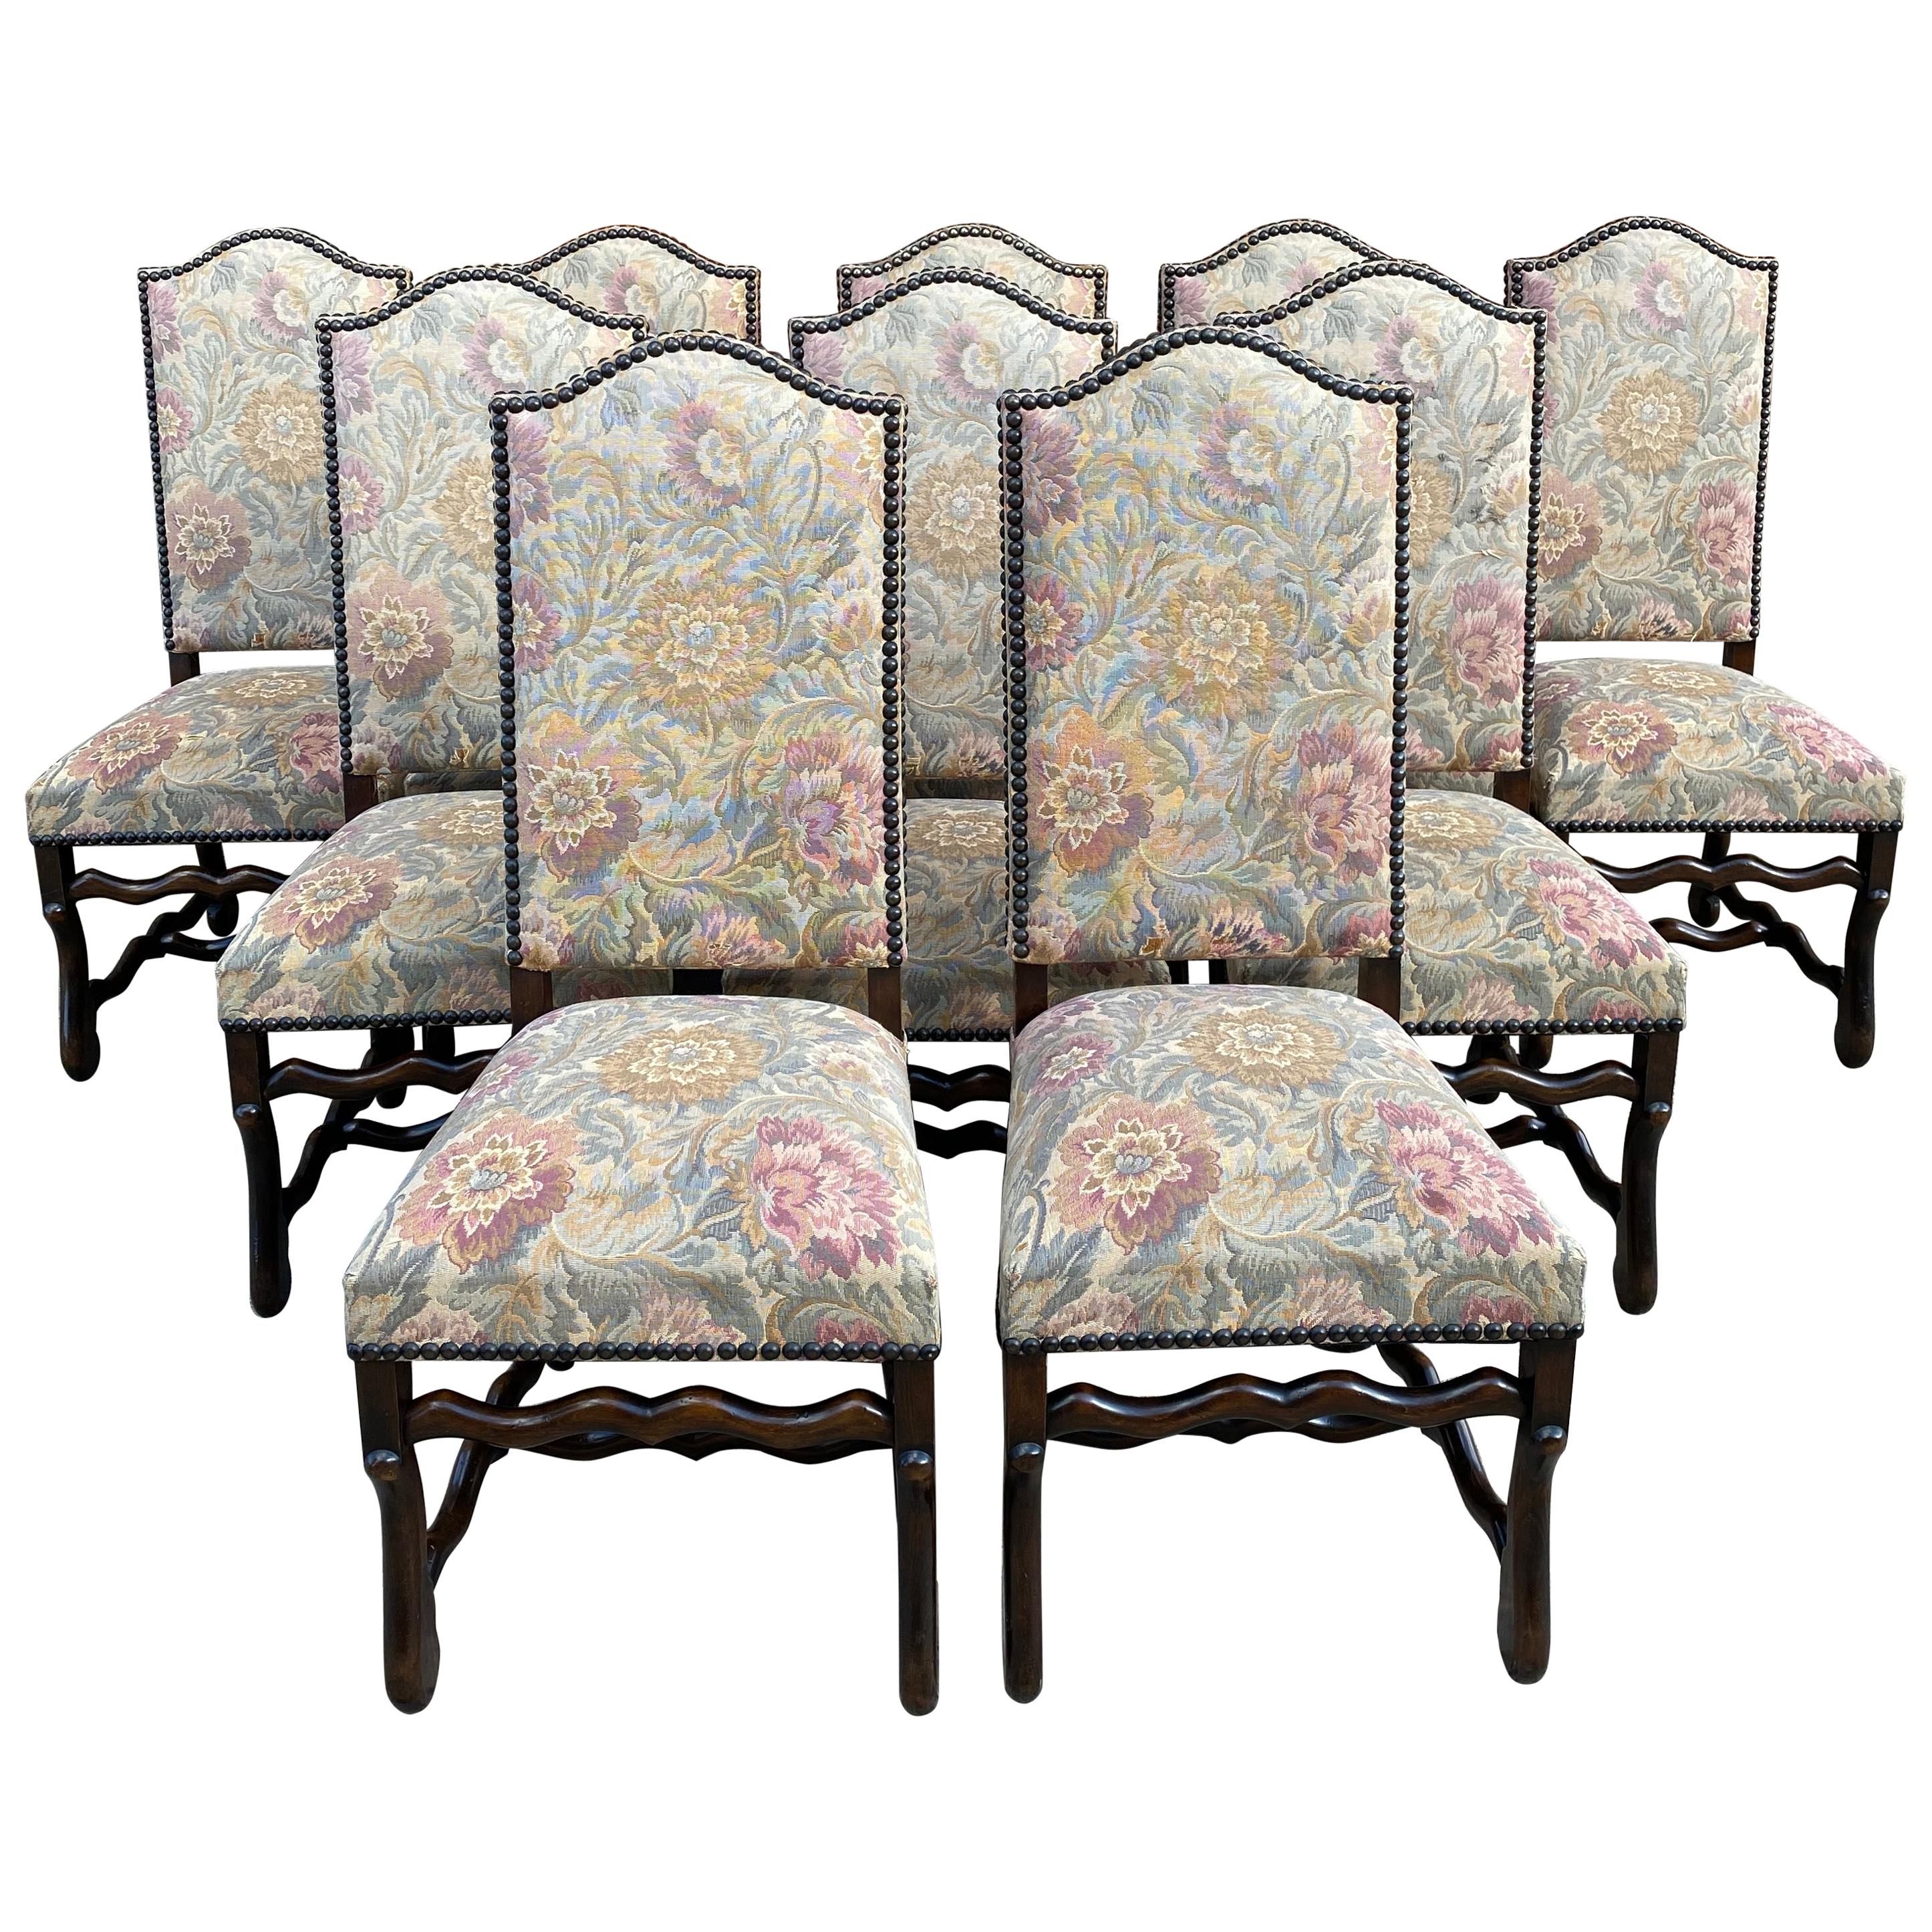 10 Late 19th Century Os De Mouton Chairs